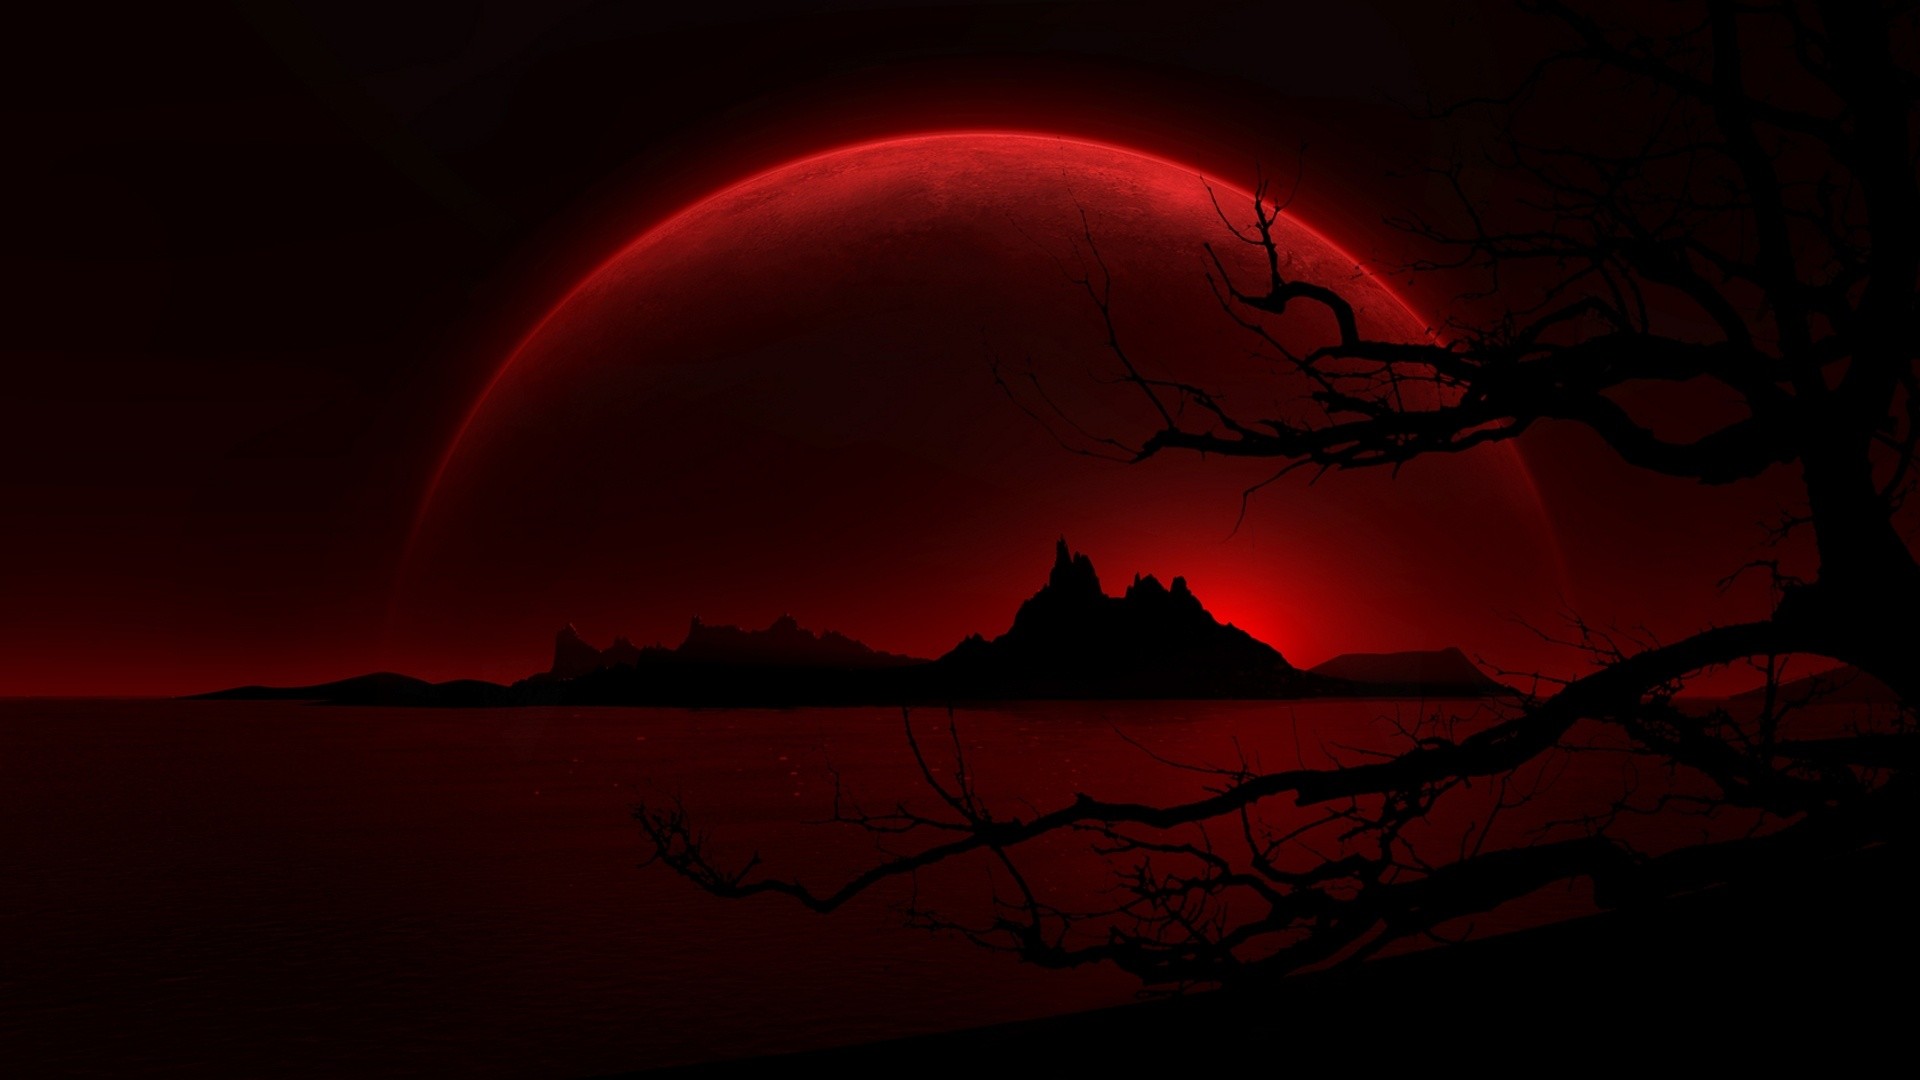 Red moon wallpaper hd wallpapers in space â imagesci